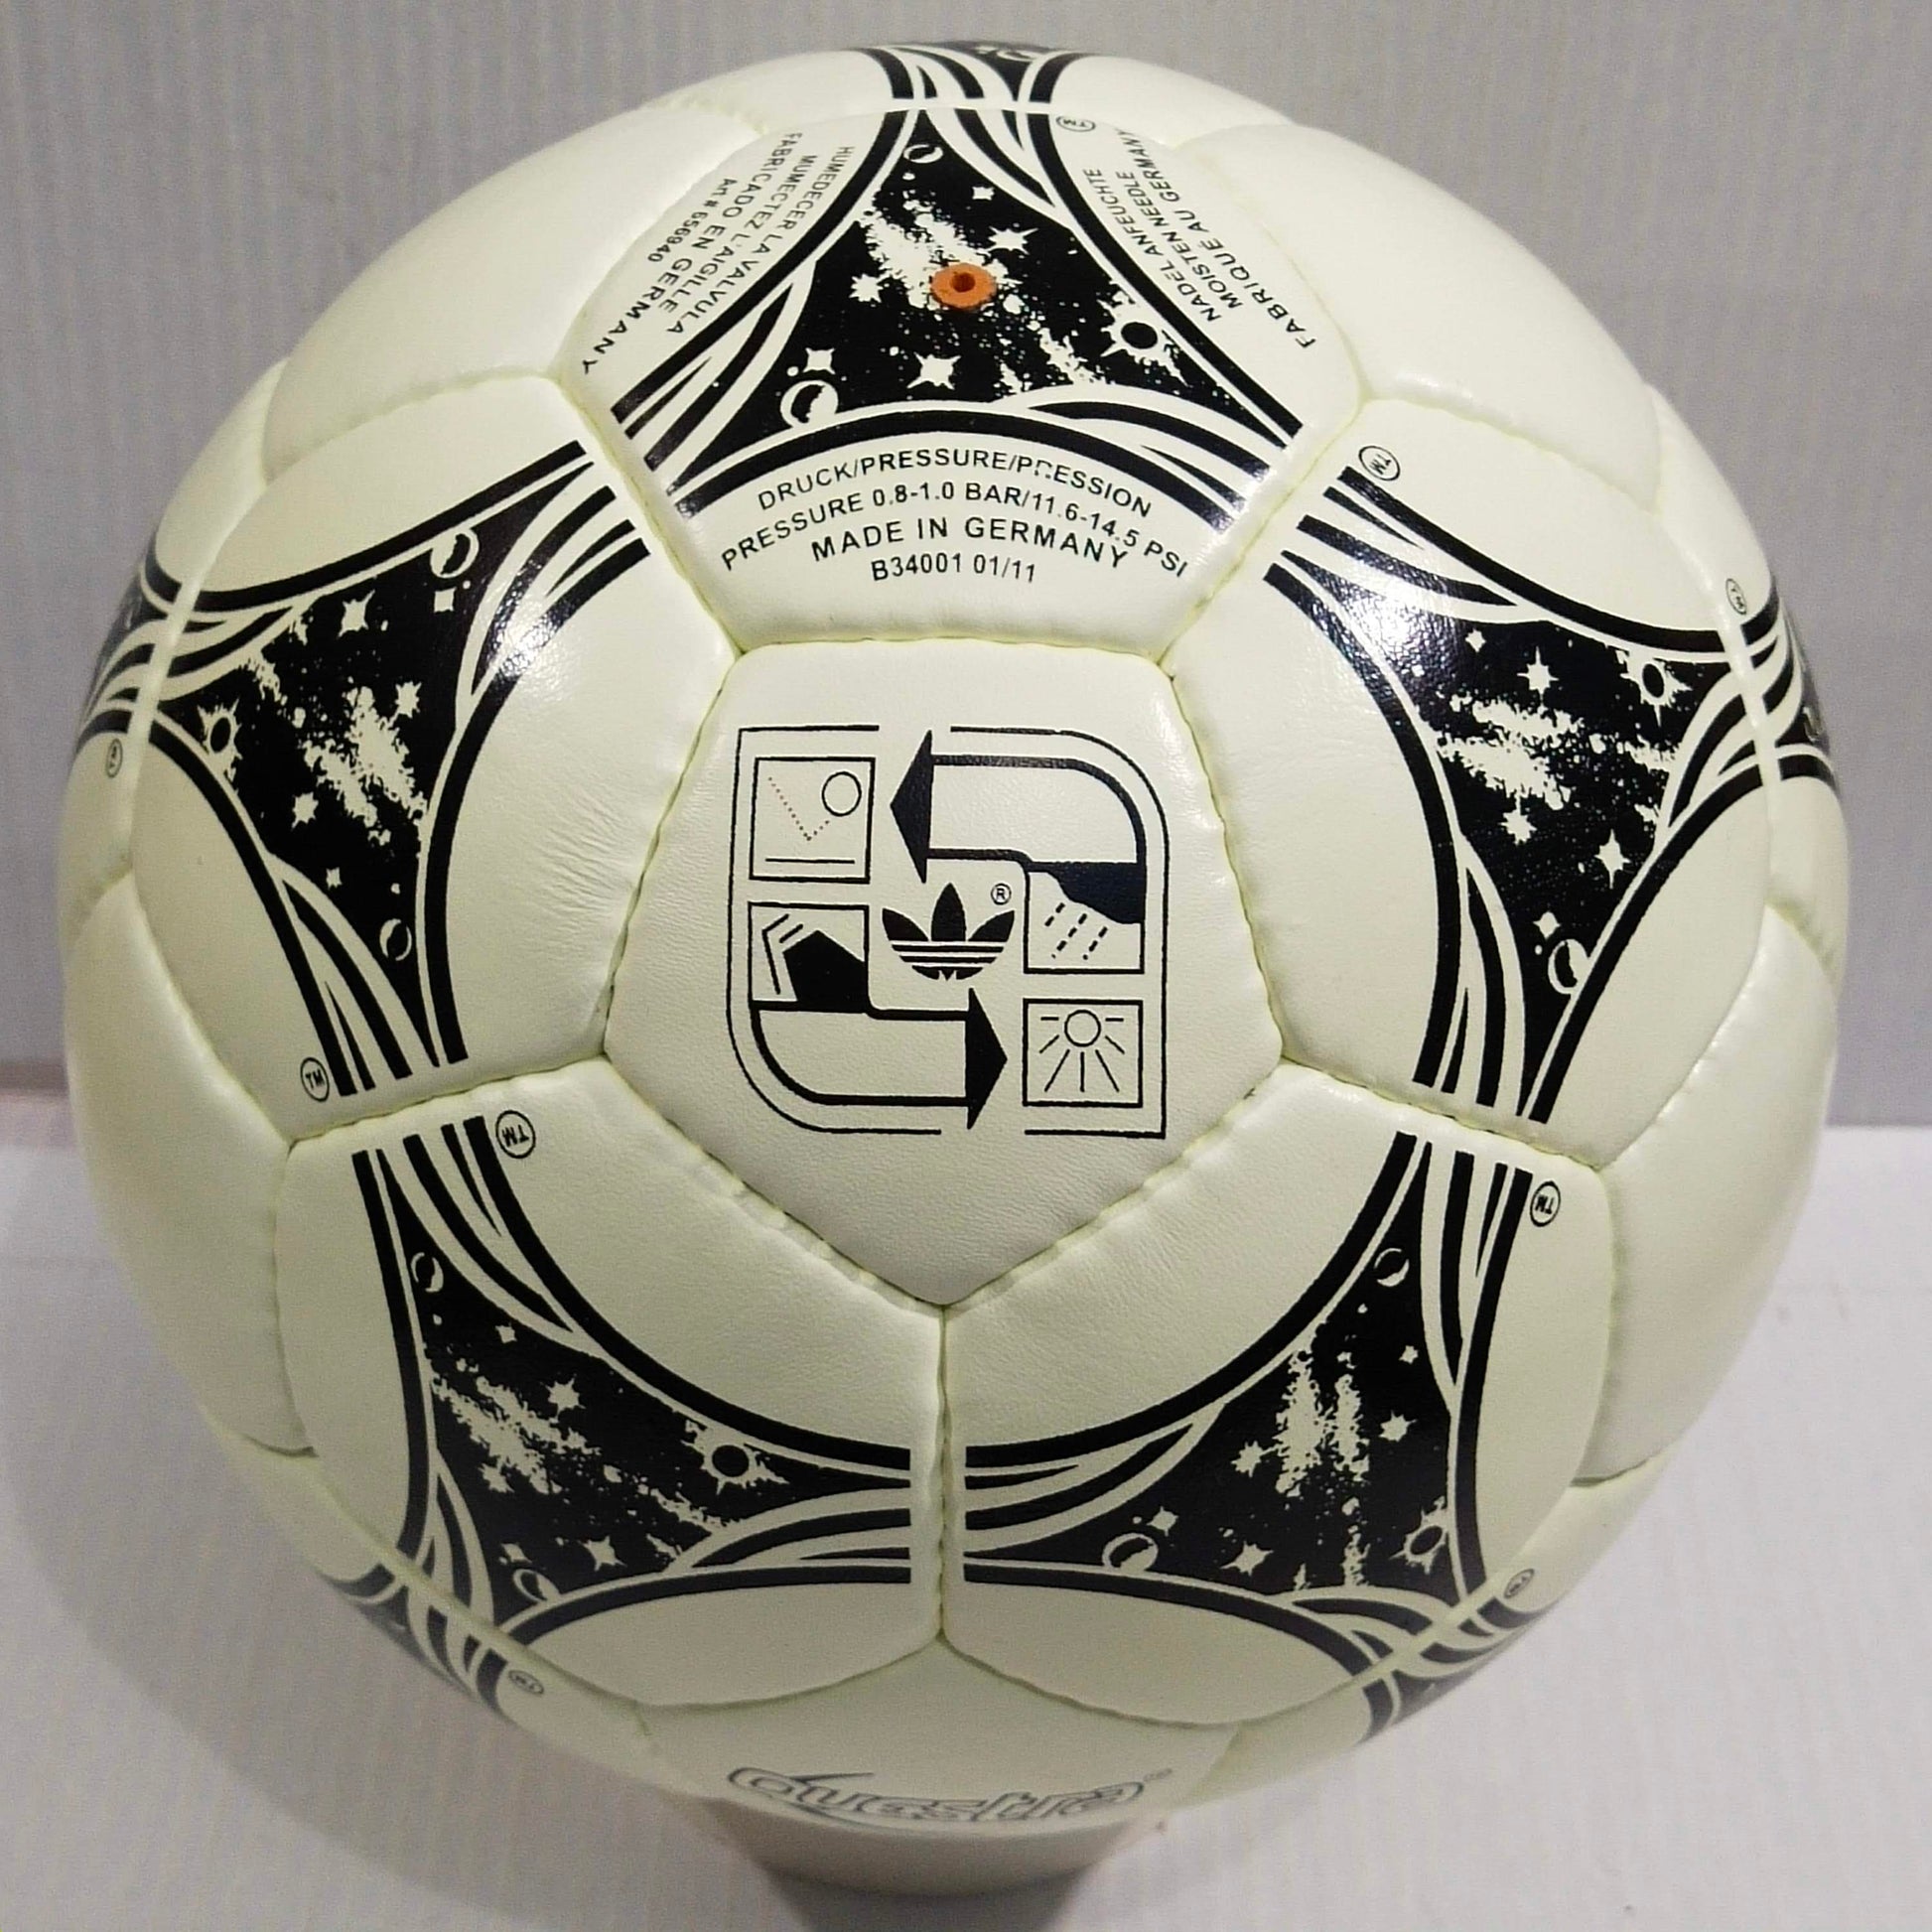 Adidas Questra | 1994 FIFA World Cup Ball | Genuine Leather Off White | SIZE 5 05